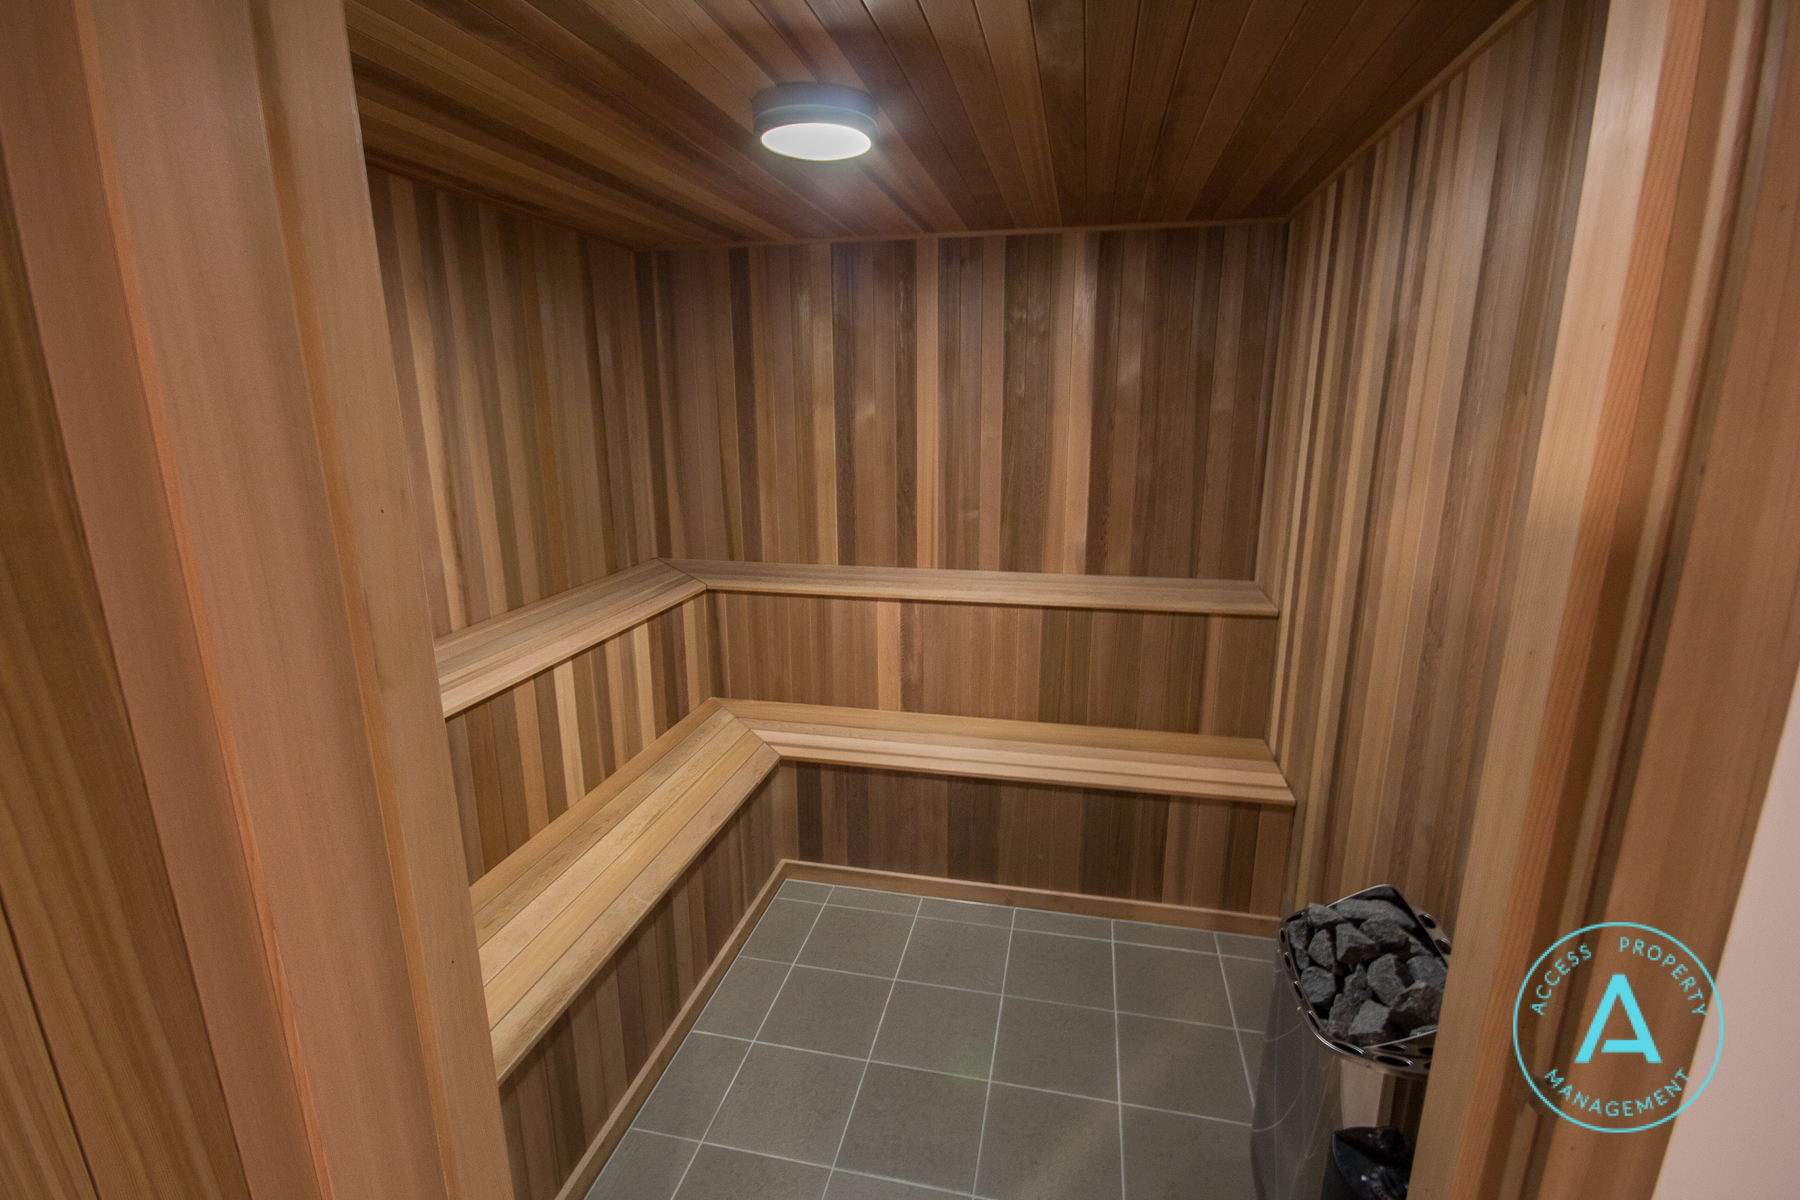 68/189 Adelaide Terrace Timber lined sauna